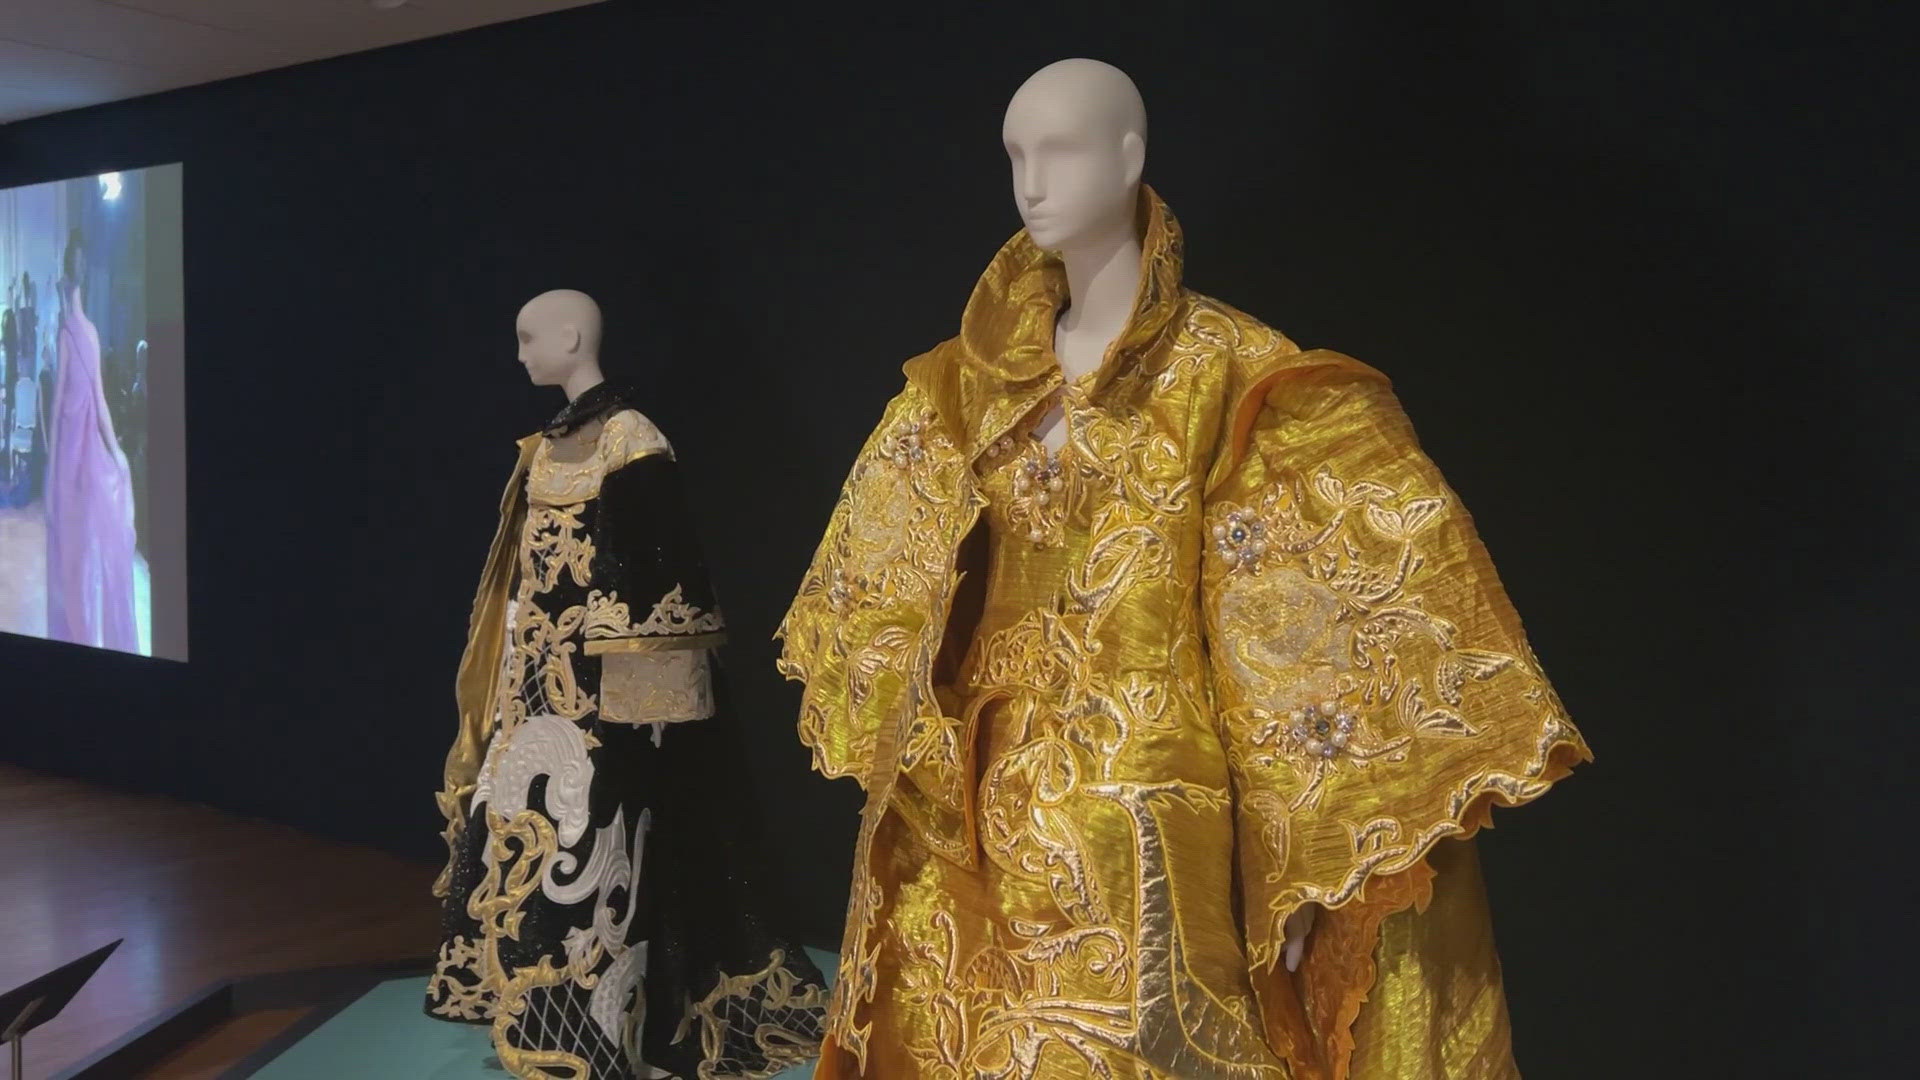 Korean Couture: Generations of Revolution is open now through Oct. 13 at the Cleveland Museum of Art.